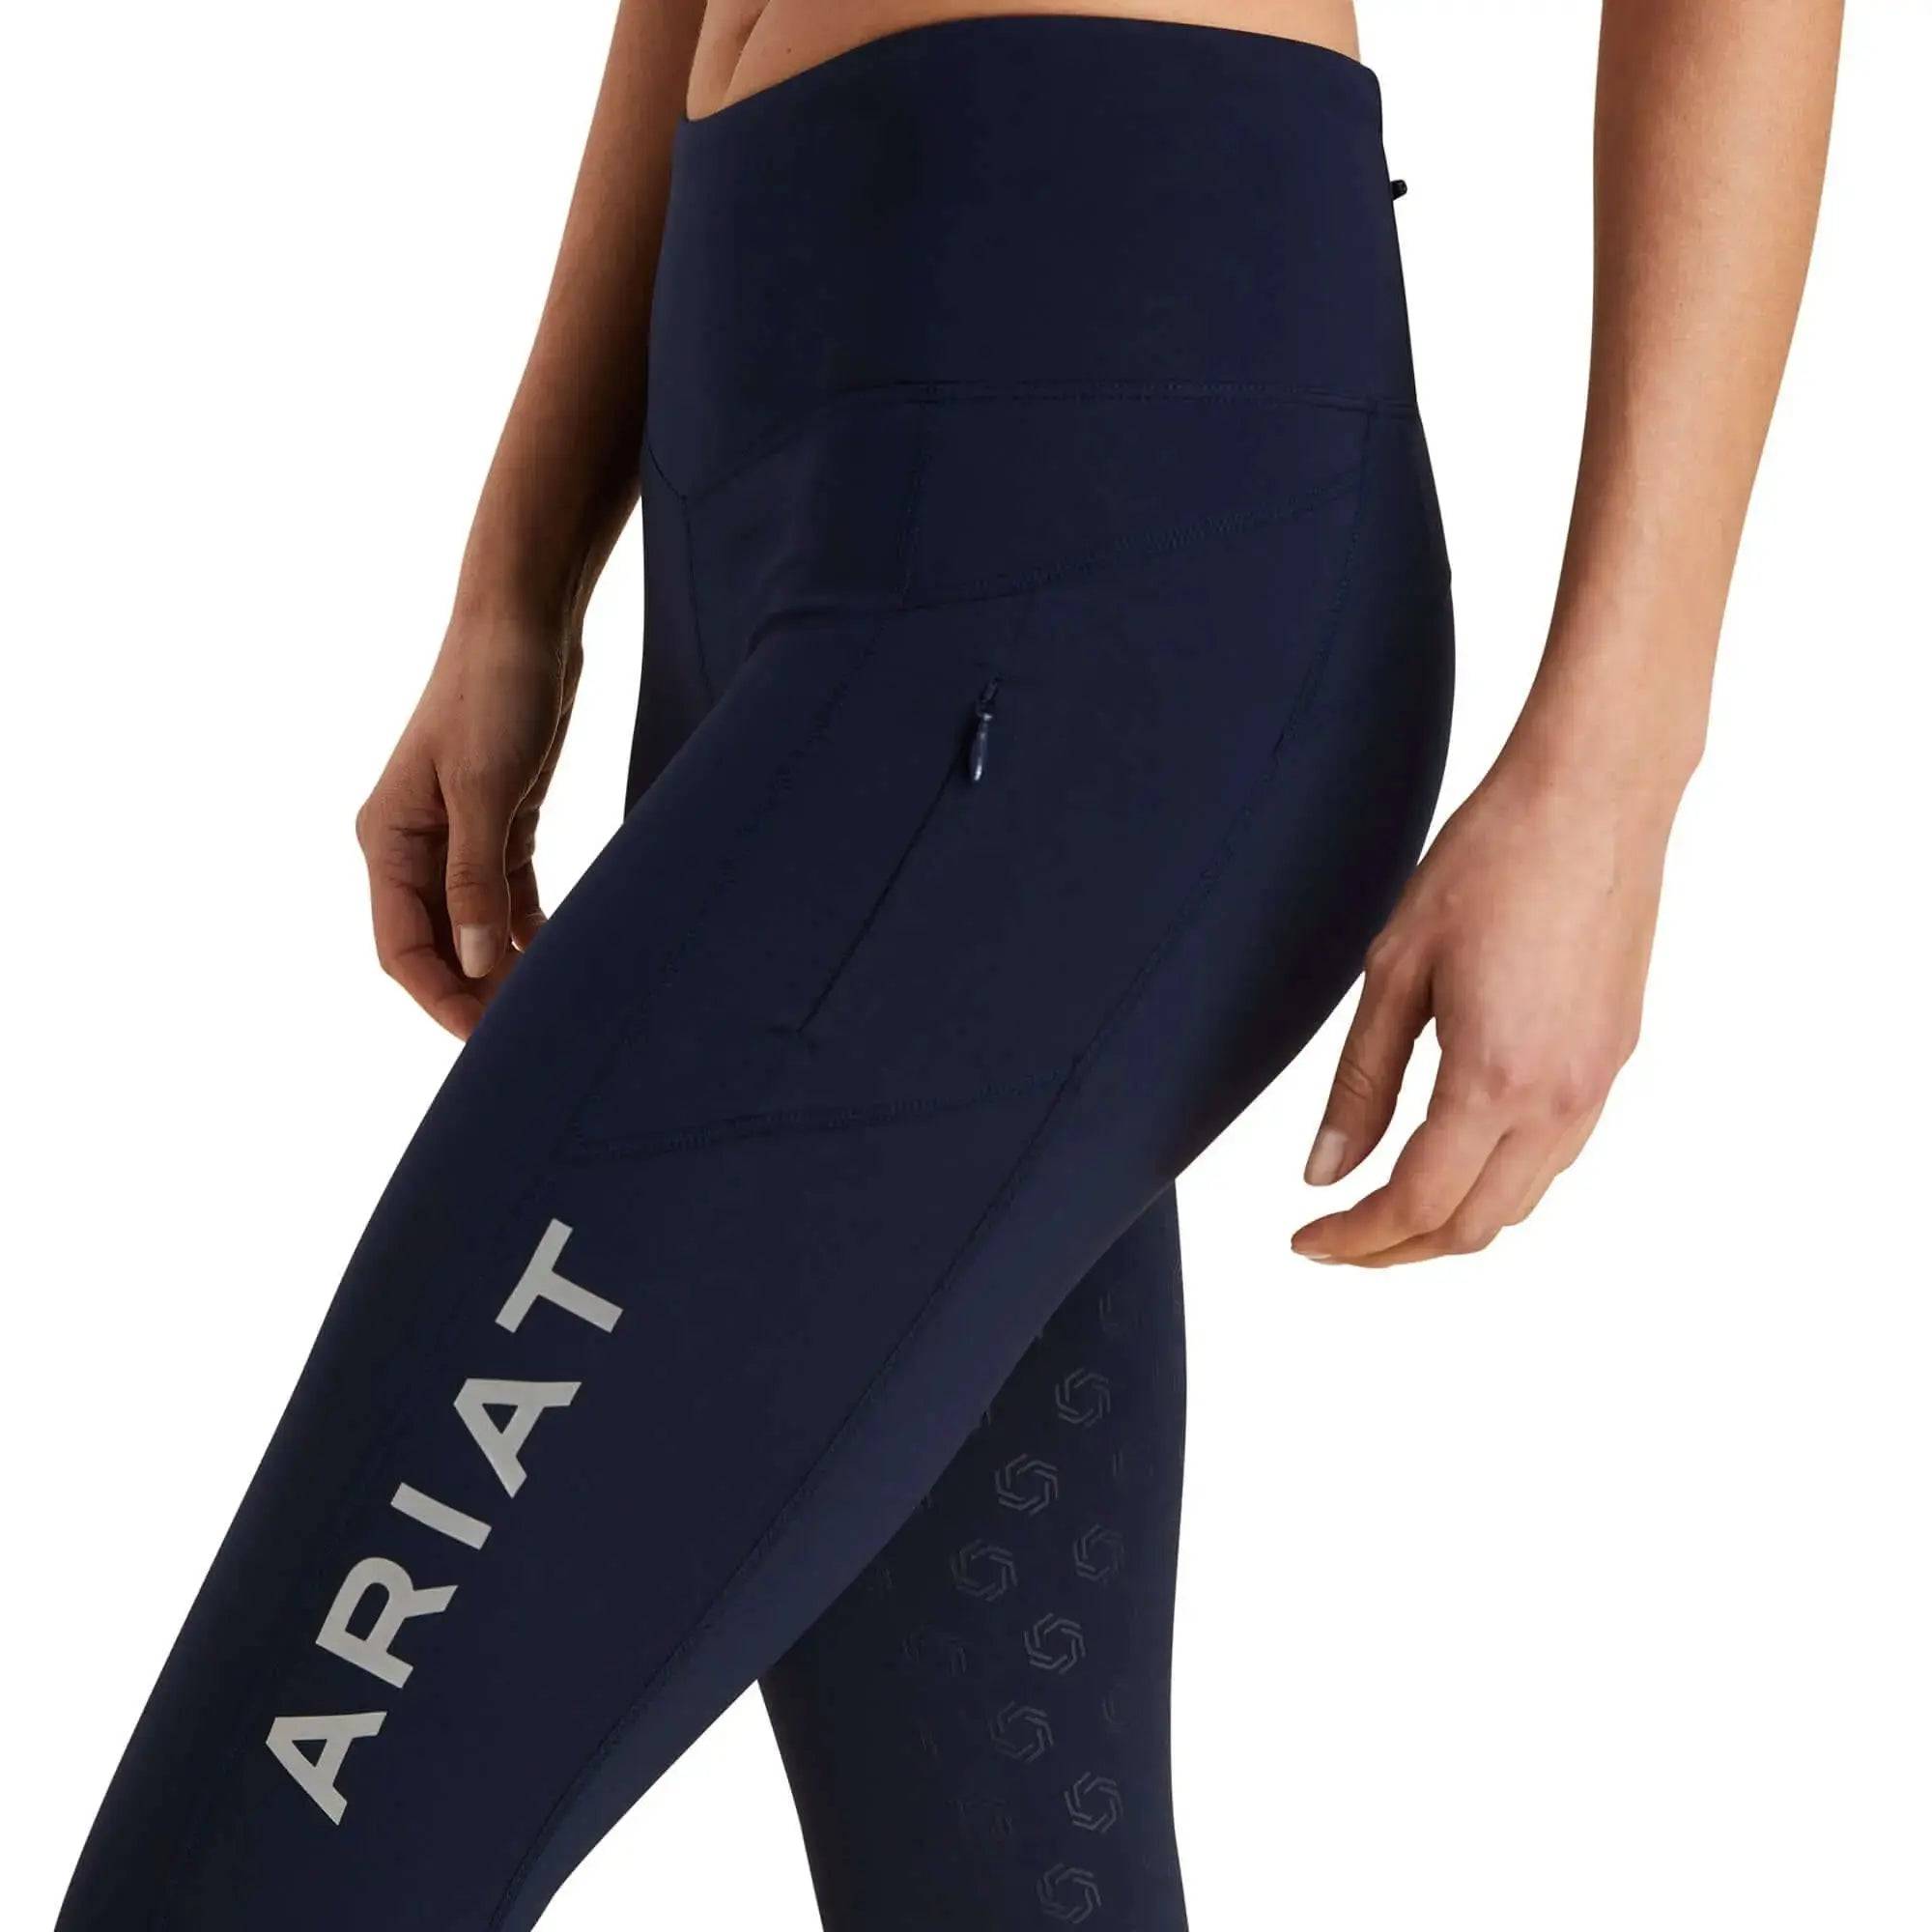 Ariat Ladies EOS Full Seat Riding Tights in Navy